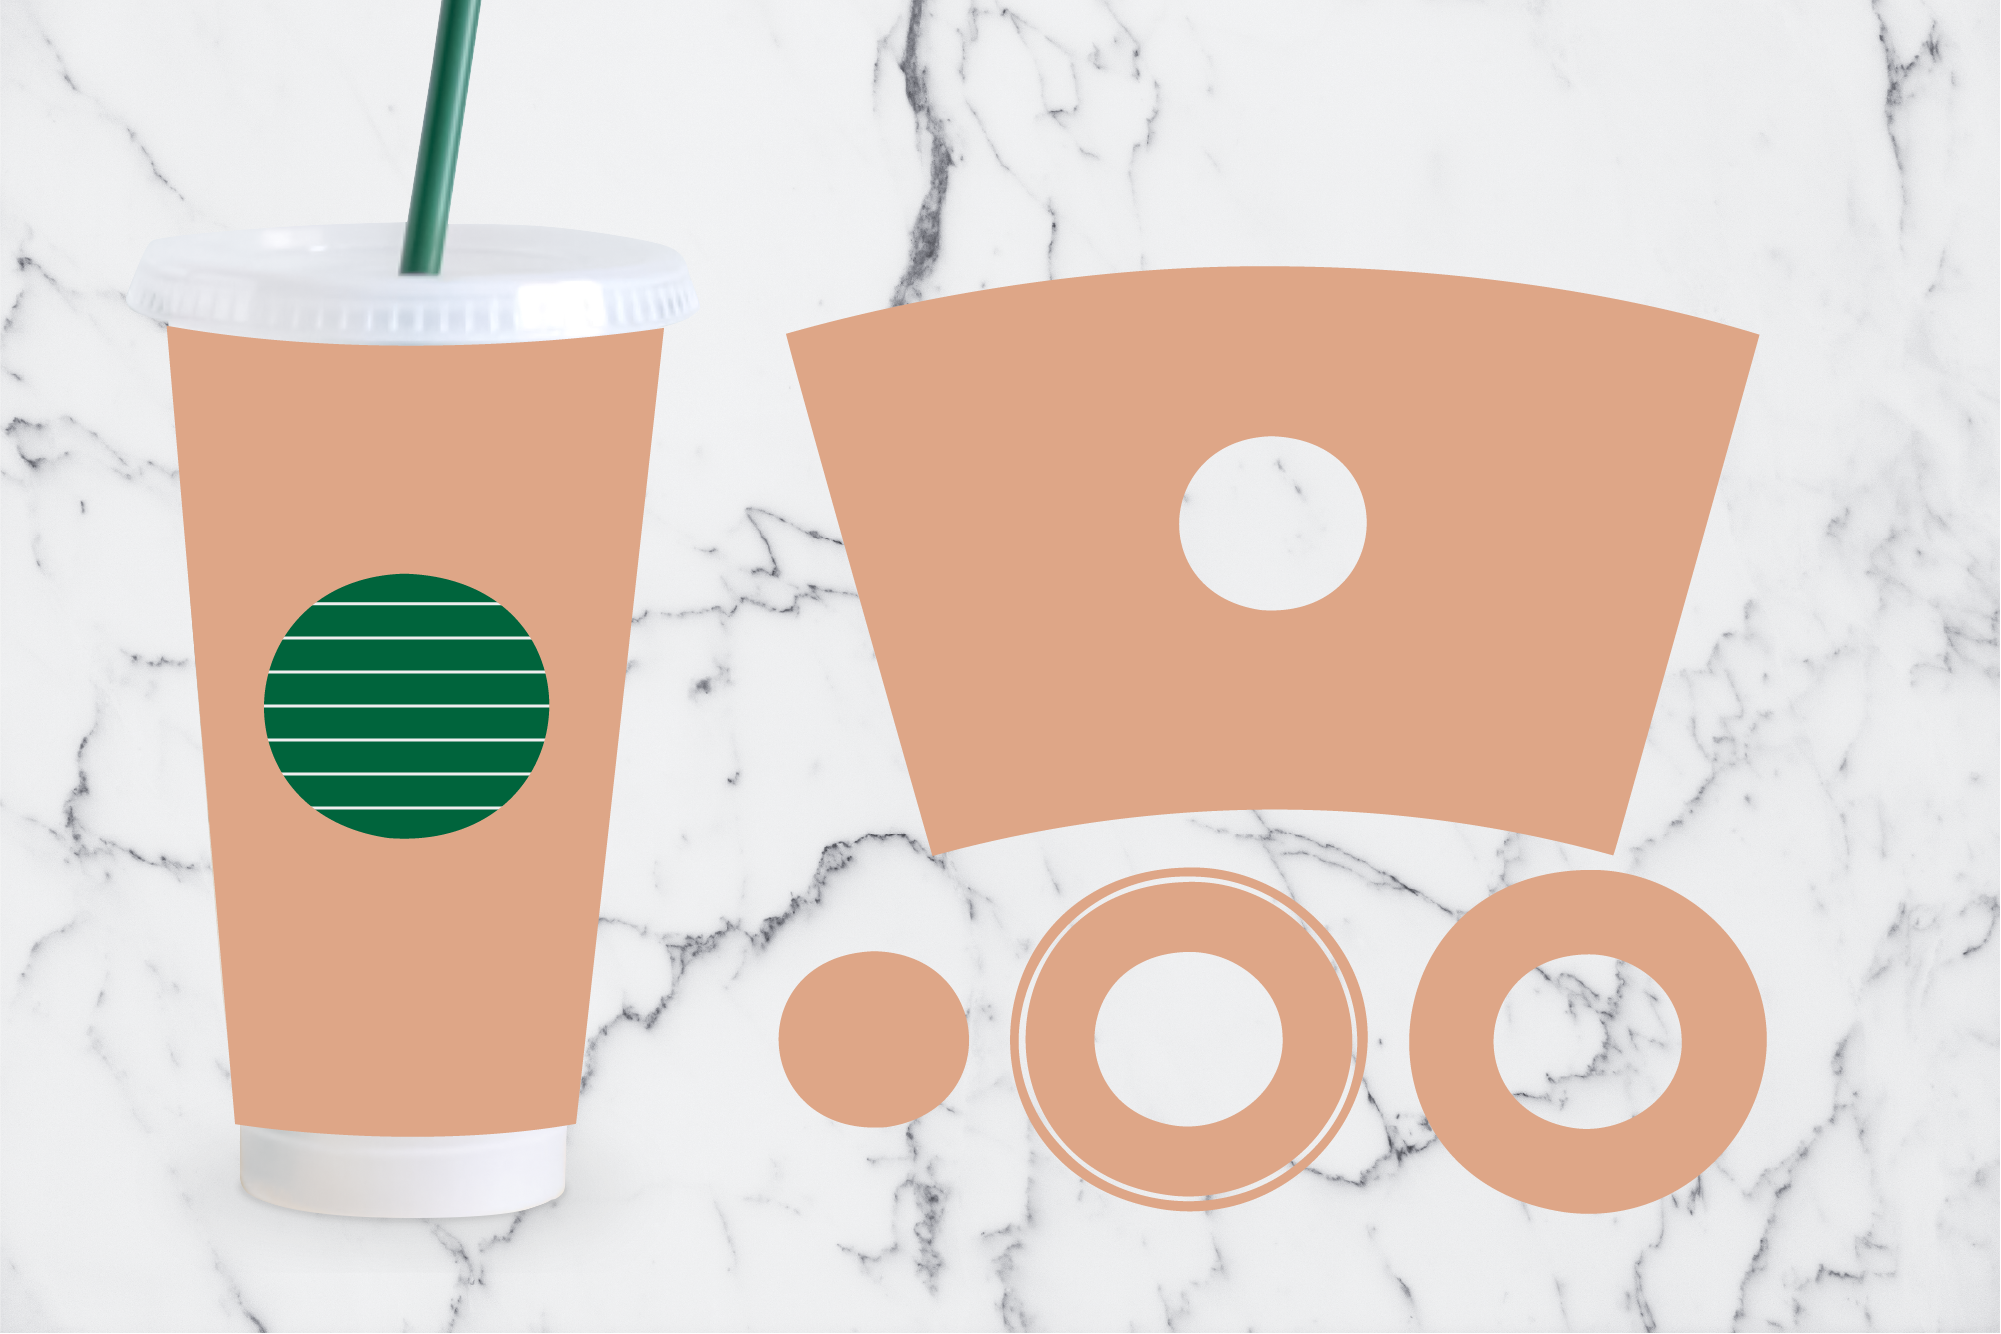 Full Wrap Template SVG - Cold Cup Wrap SVG - (1611676)